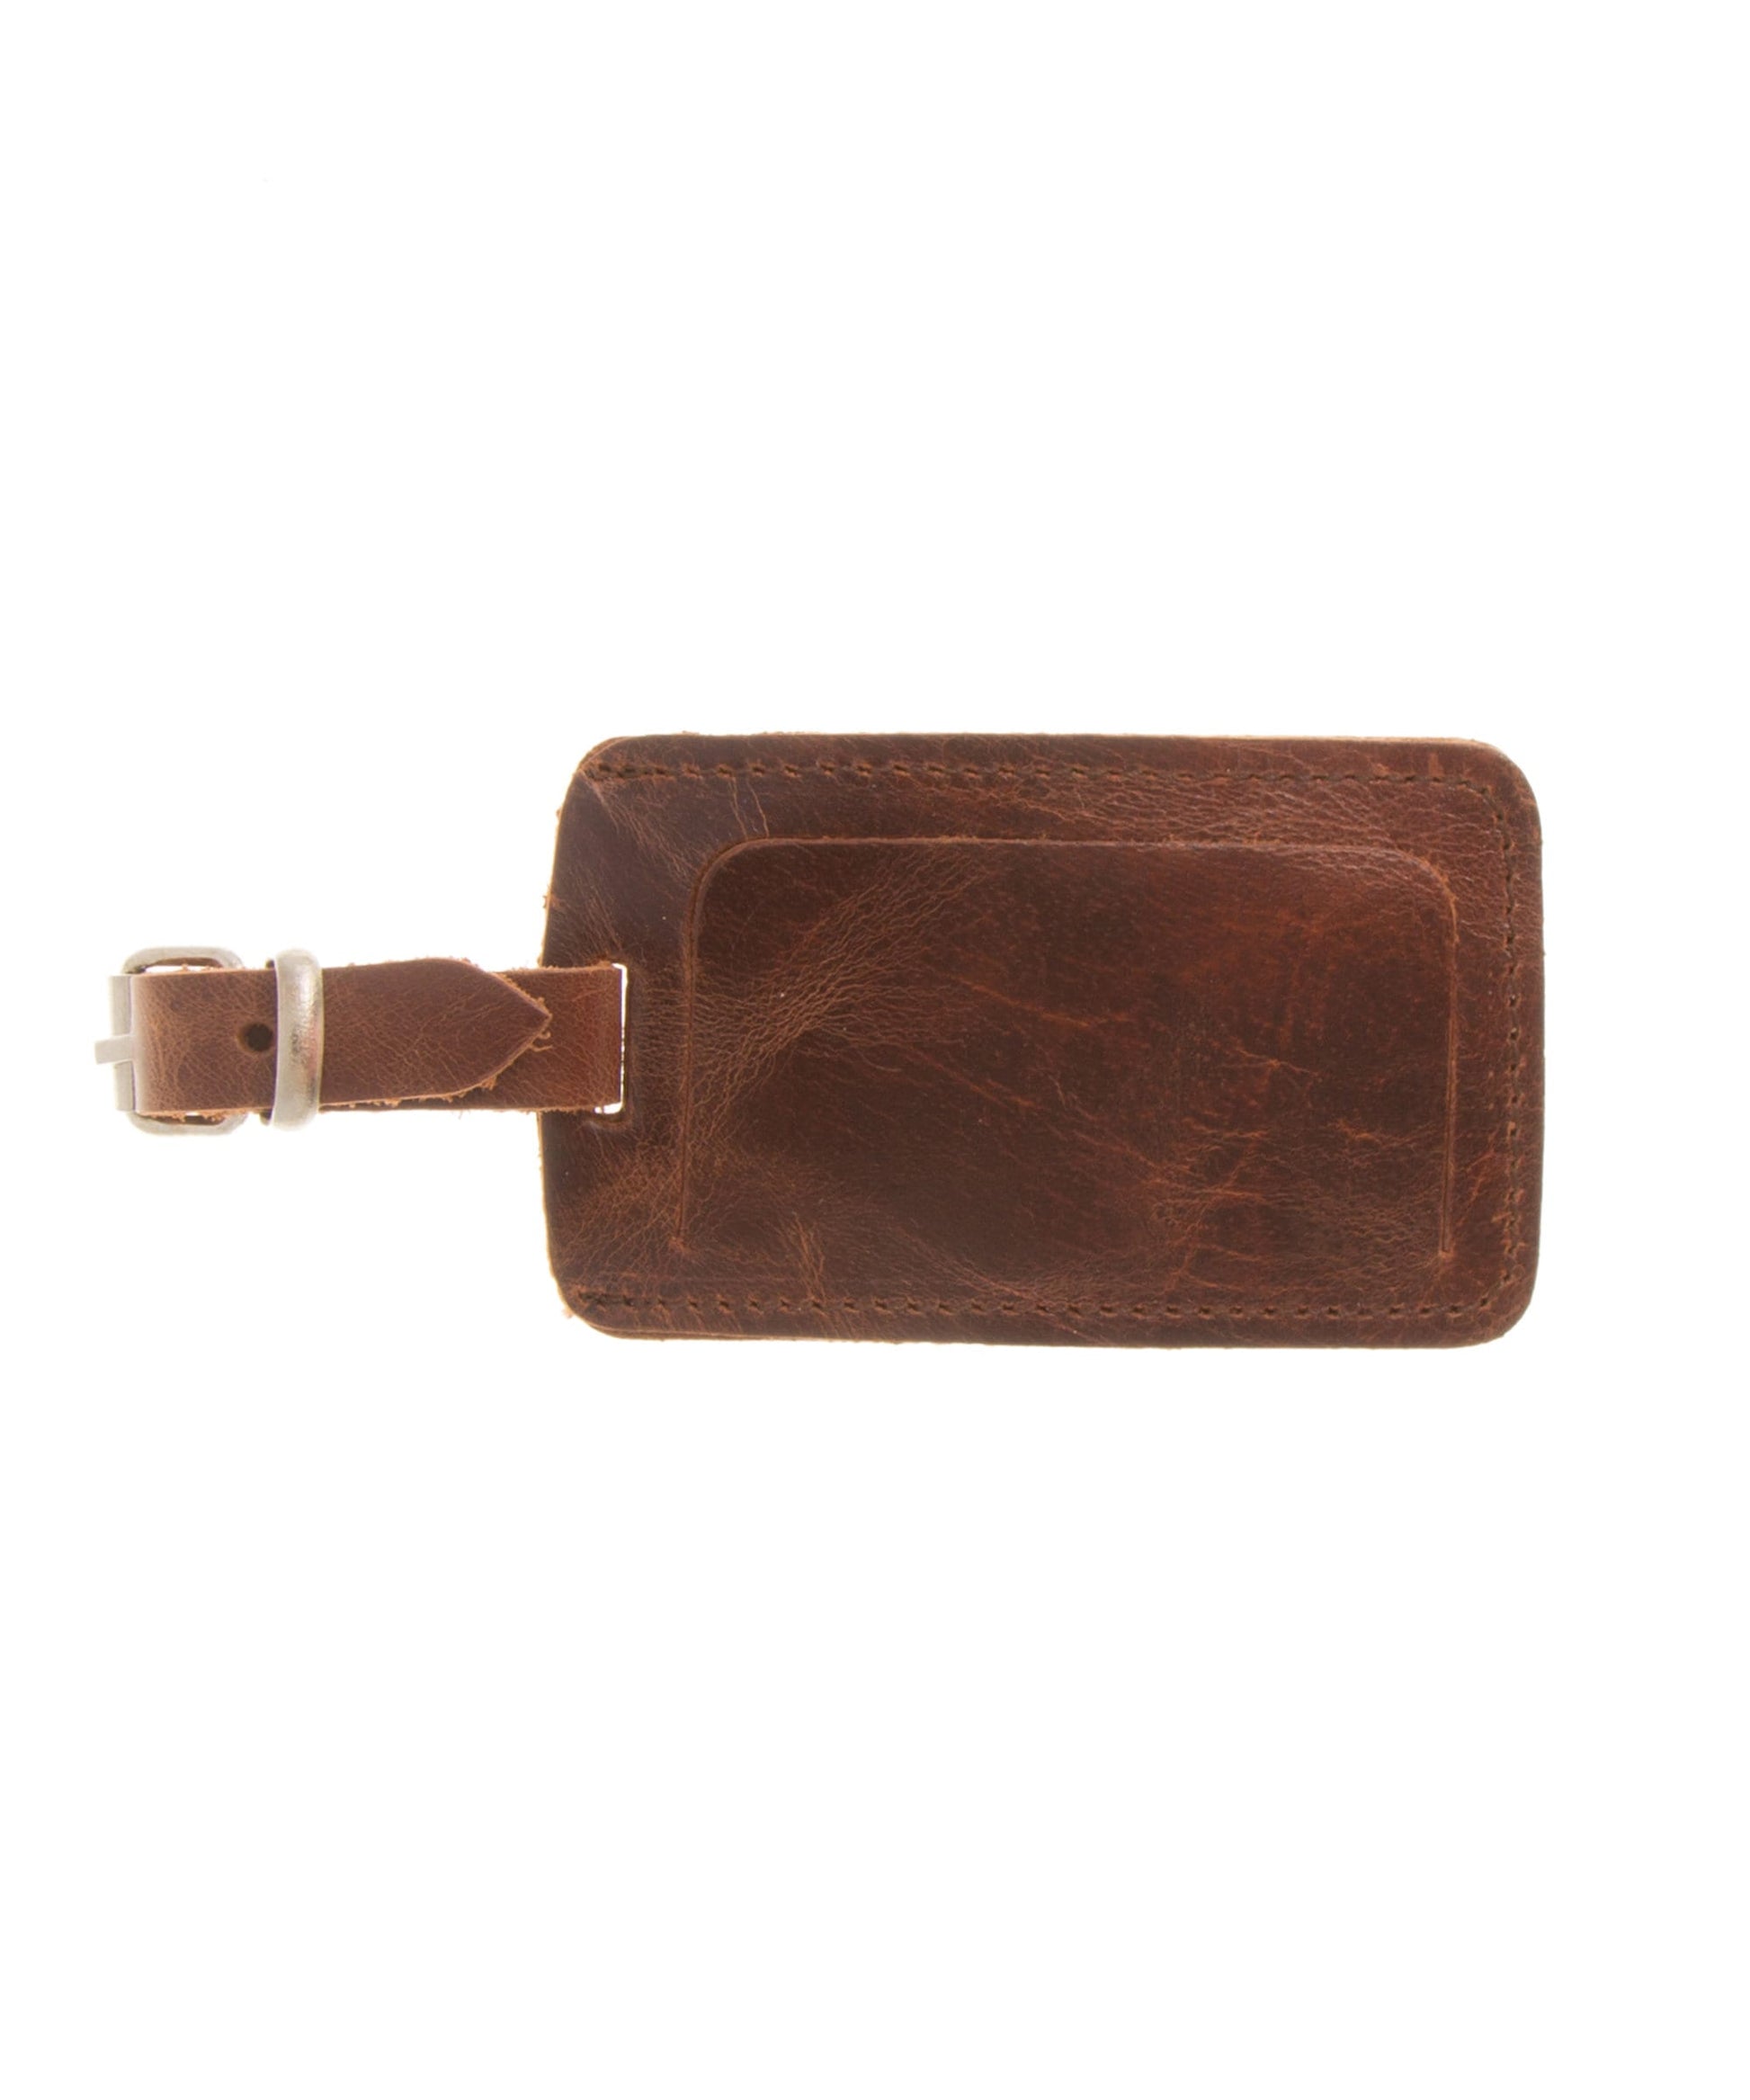 Leather Luggage Tags, Suitcase tag, Backpack tag, Travel accessories, Leather gifts